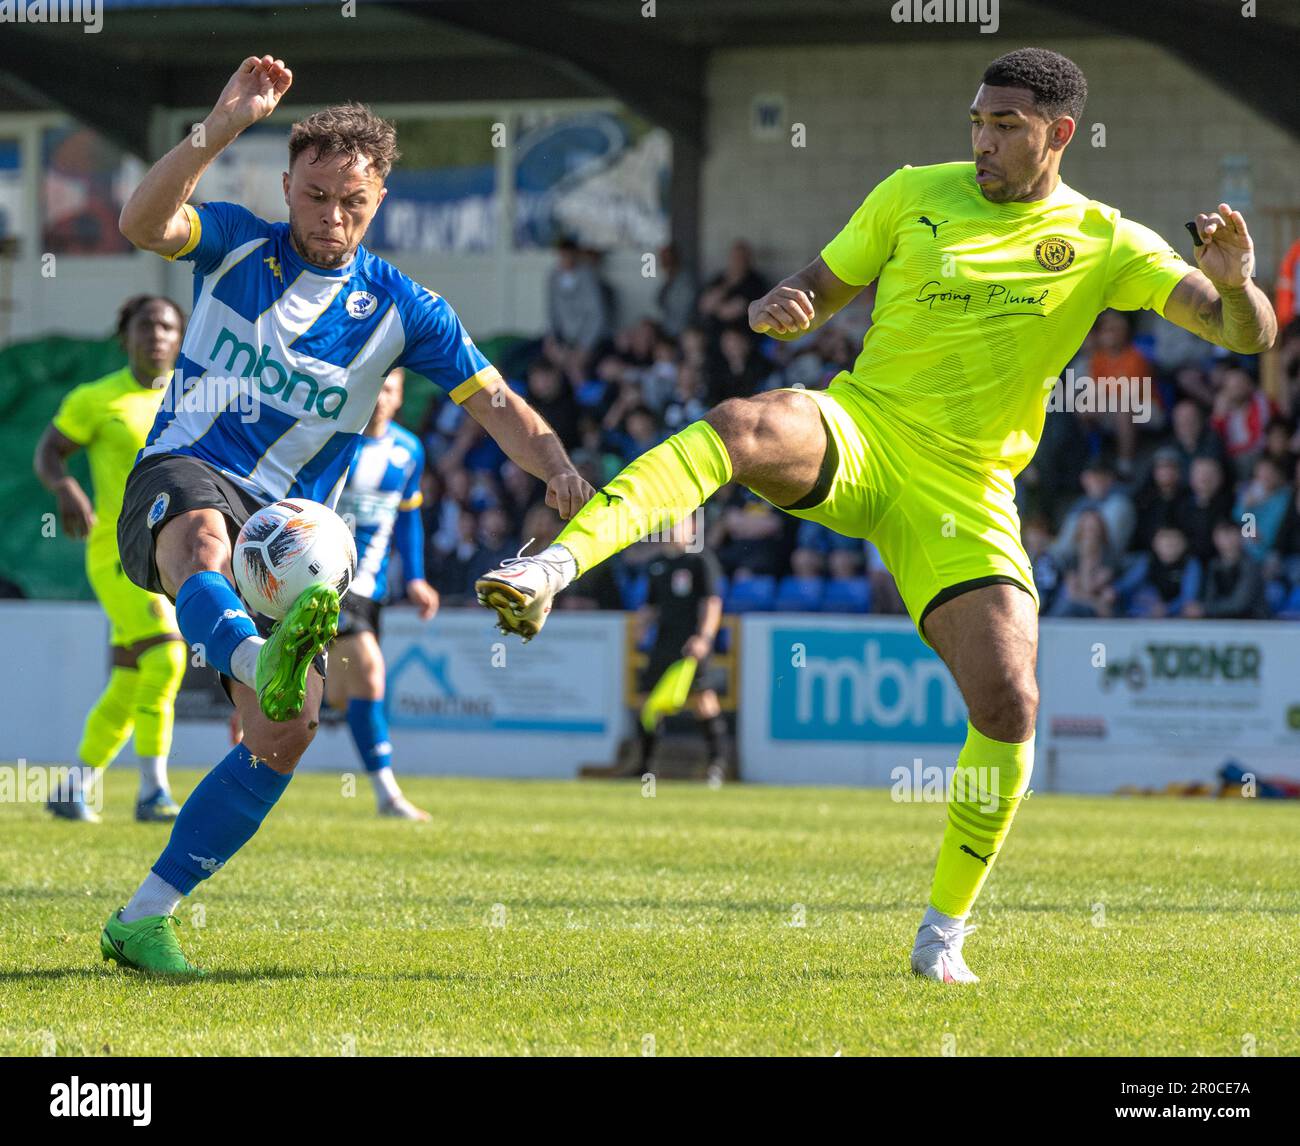 Deva Stadium, Chester, Cheshire, England, 7th May 2023. Chester’s Kurt Willoughby brings the ball under control, during Chester Football Club V Brackley Town Football Club, in the Vanarama National League North Semi-Final Play-Off Credit Image: ©Cody Froggatt Alamy live news) Stock Photo